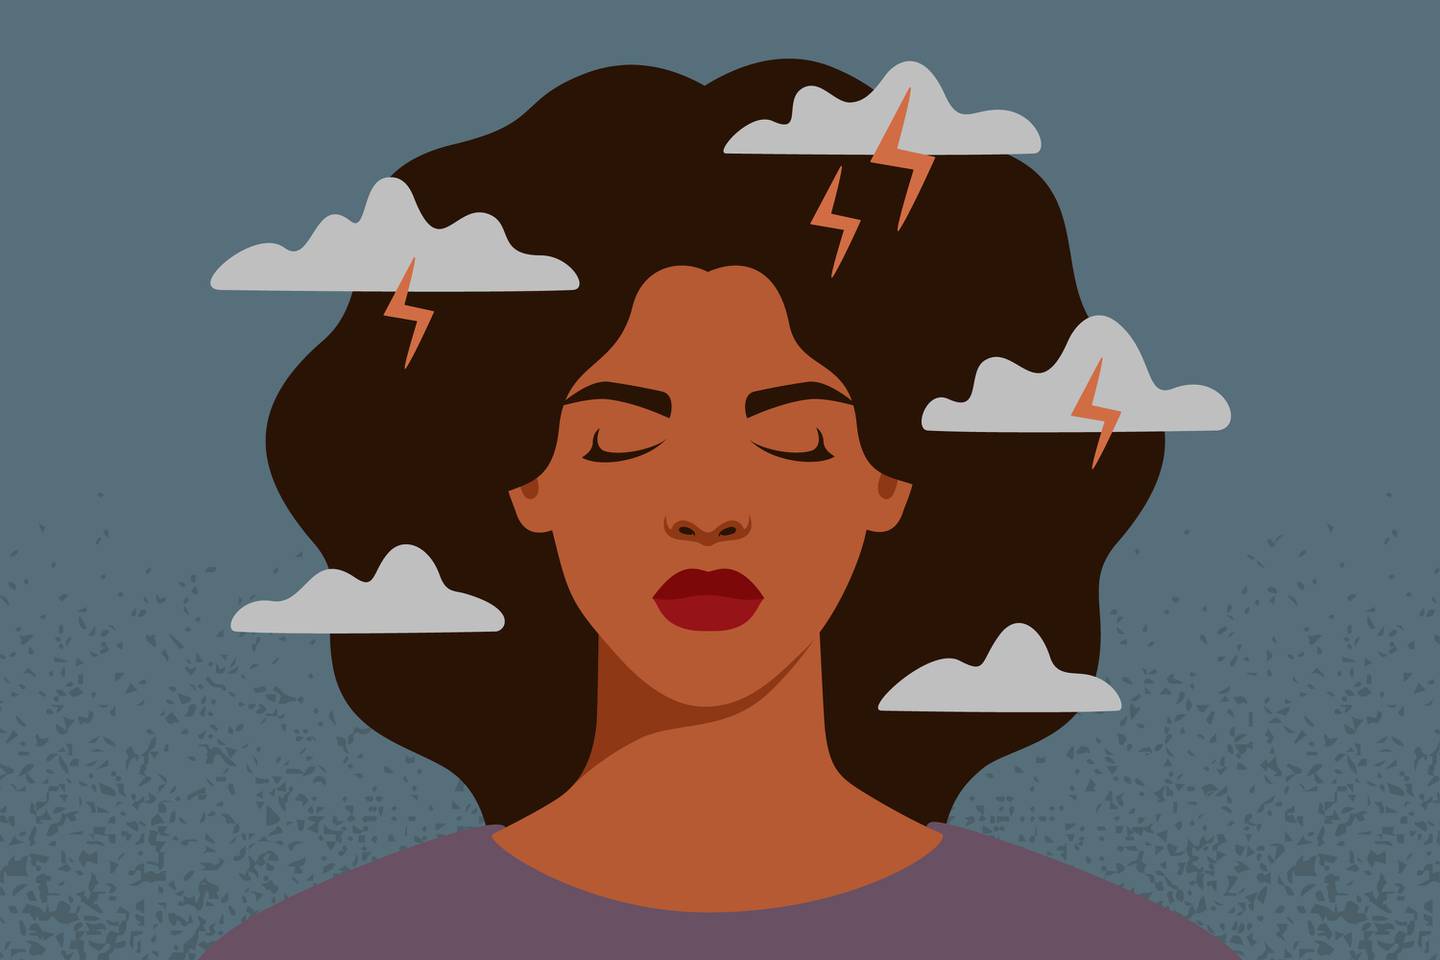 Illustration of a woman surrounded by storms.